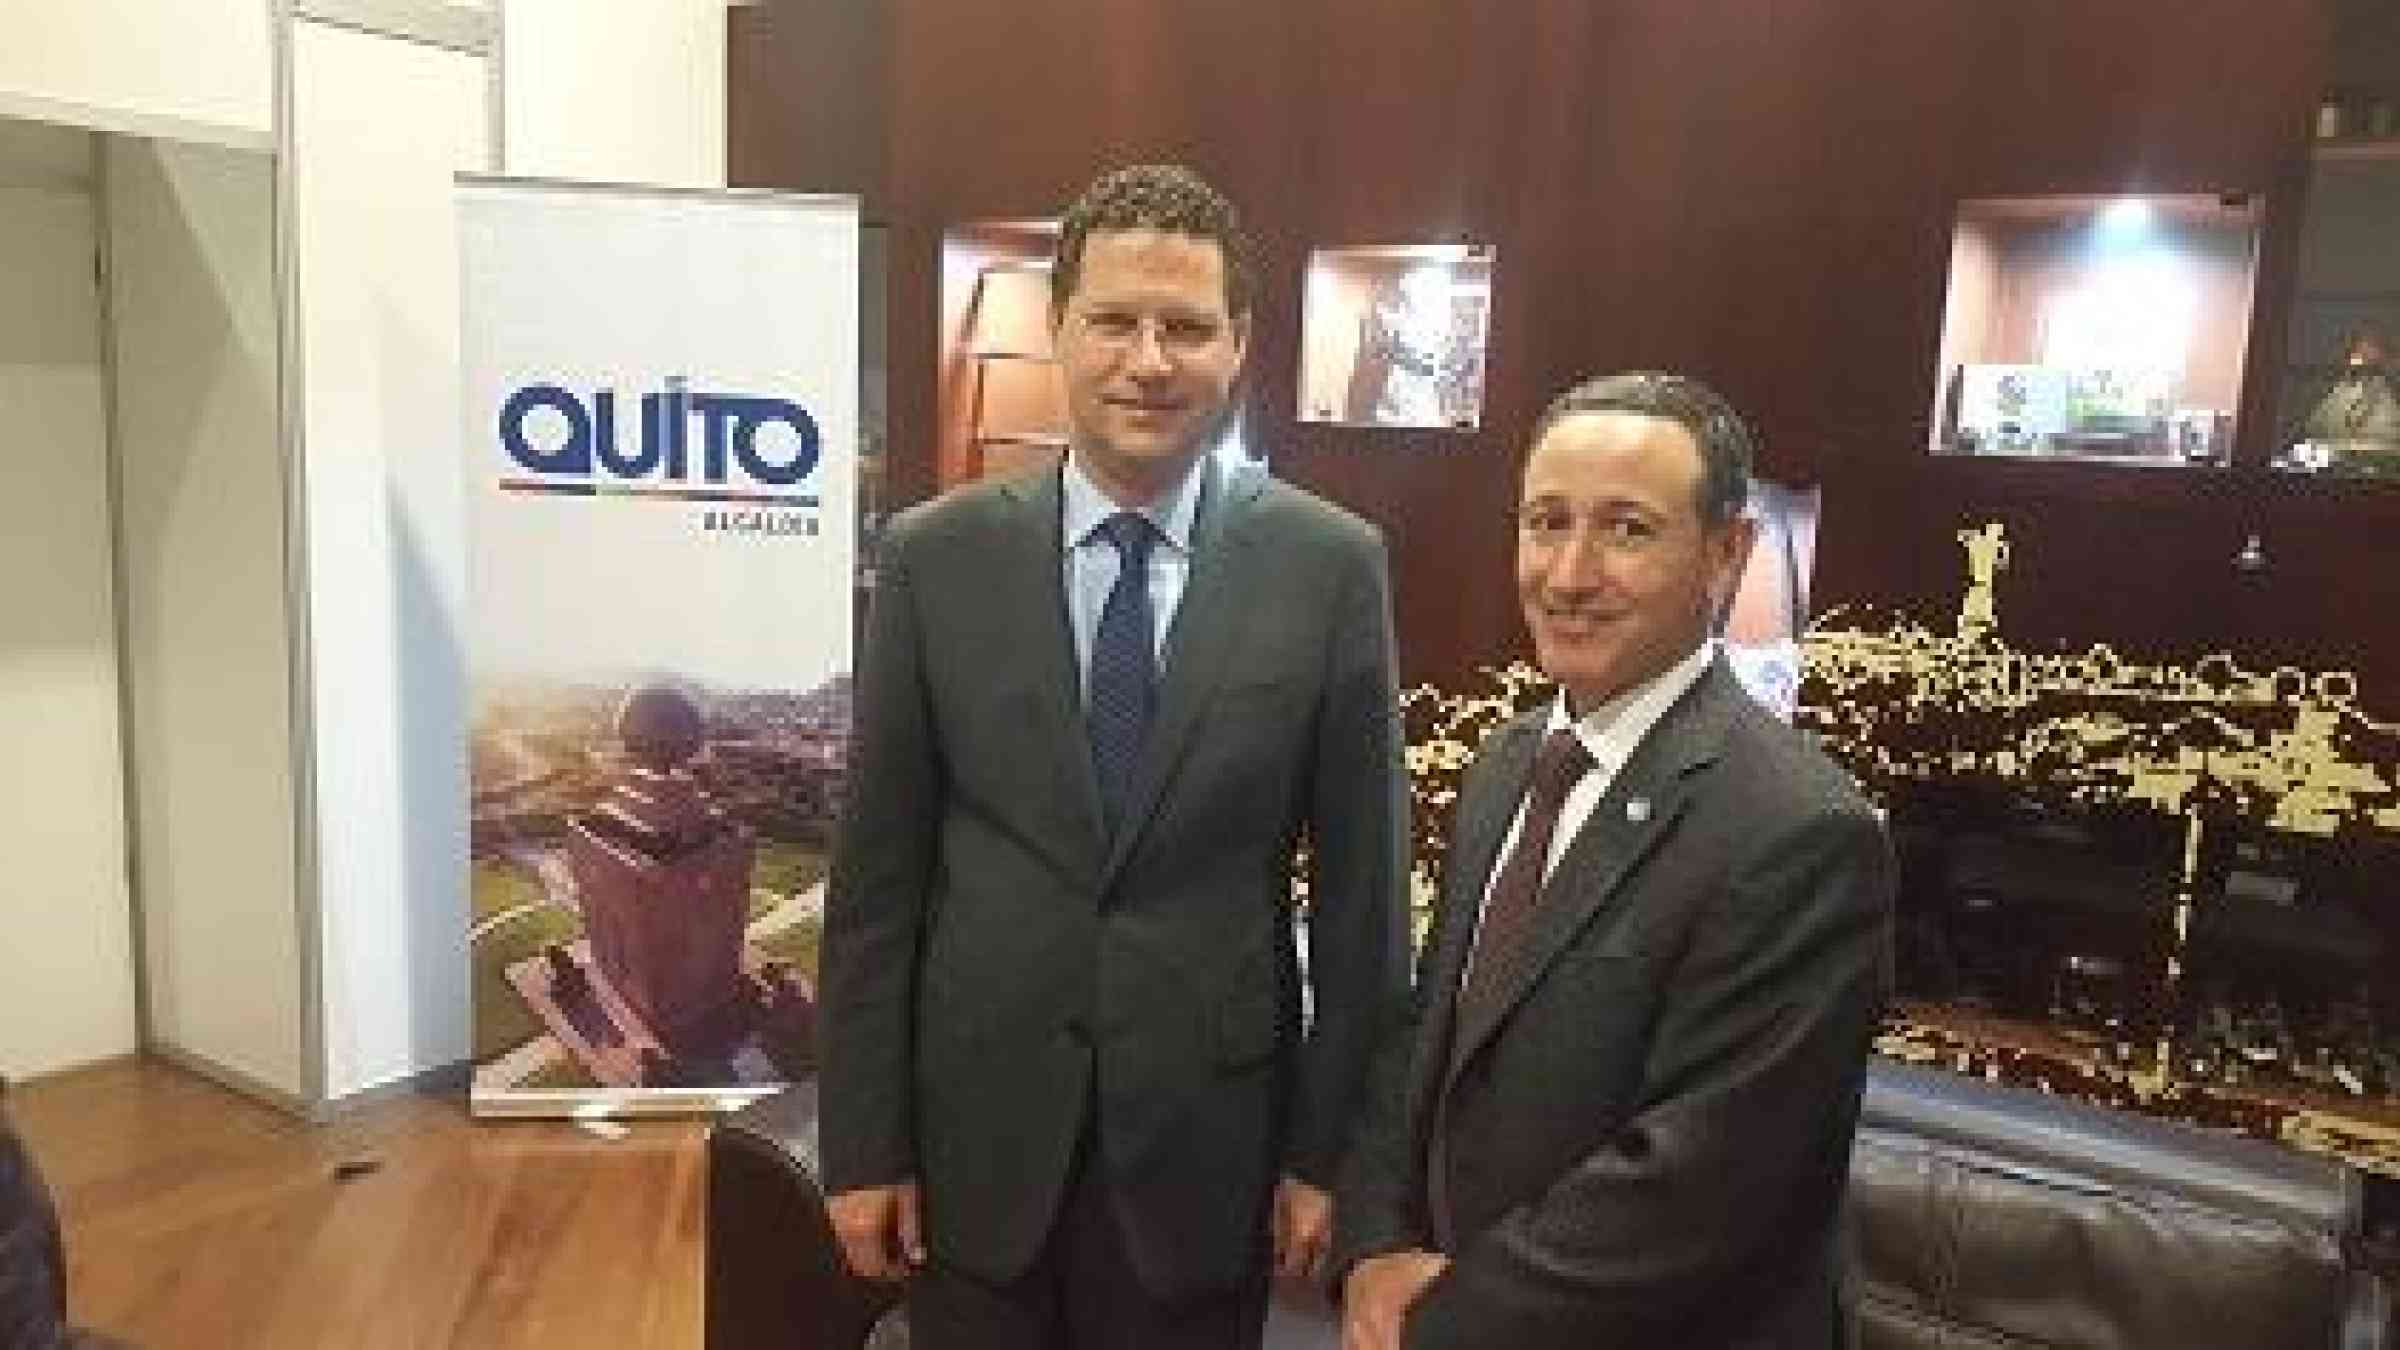 The Mayor of Quito, Mr. Mauricio Rodas (left) with head of UNISDR, Robert Glasser. The Mayor highlighted the need for transfer of resources to the local level if the New Urban Agenda is to be implemented.